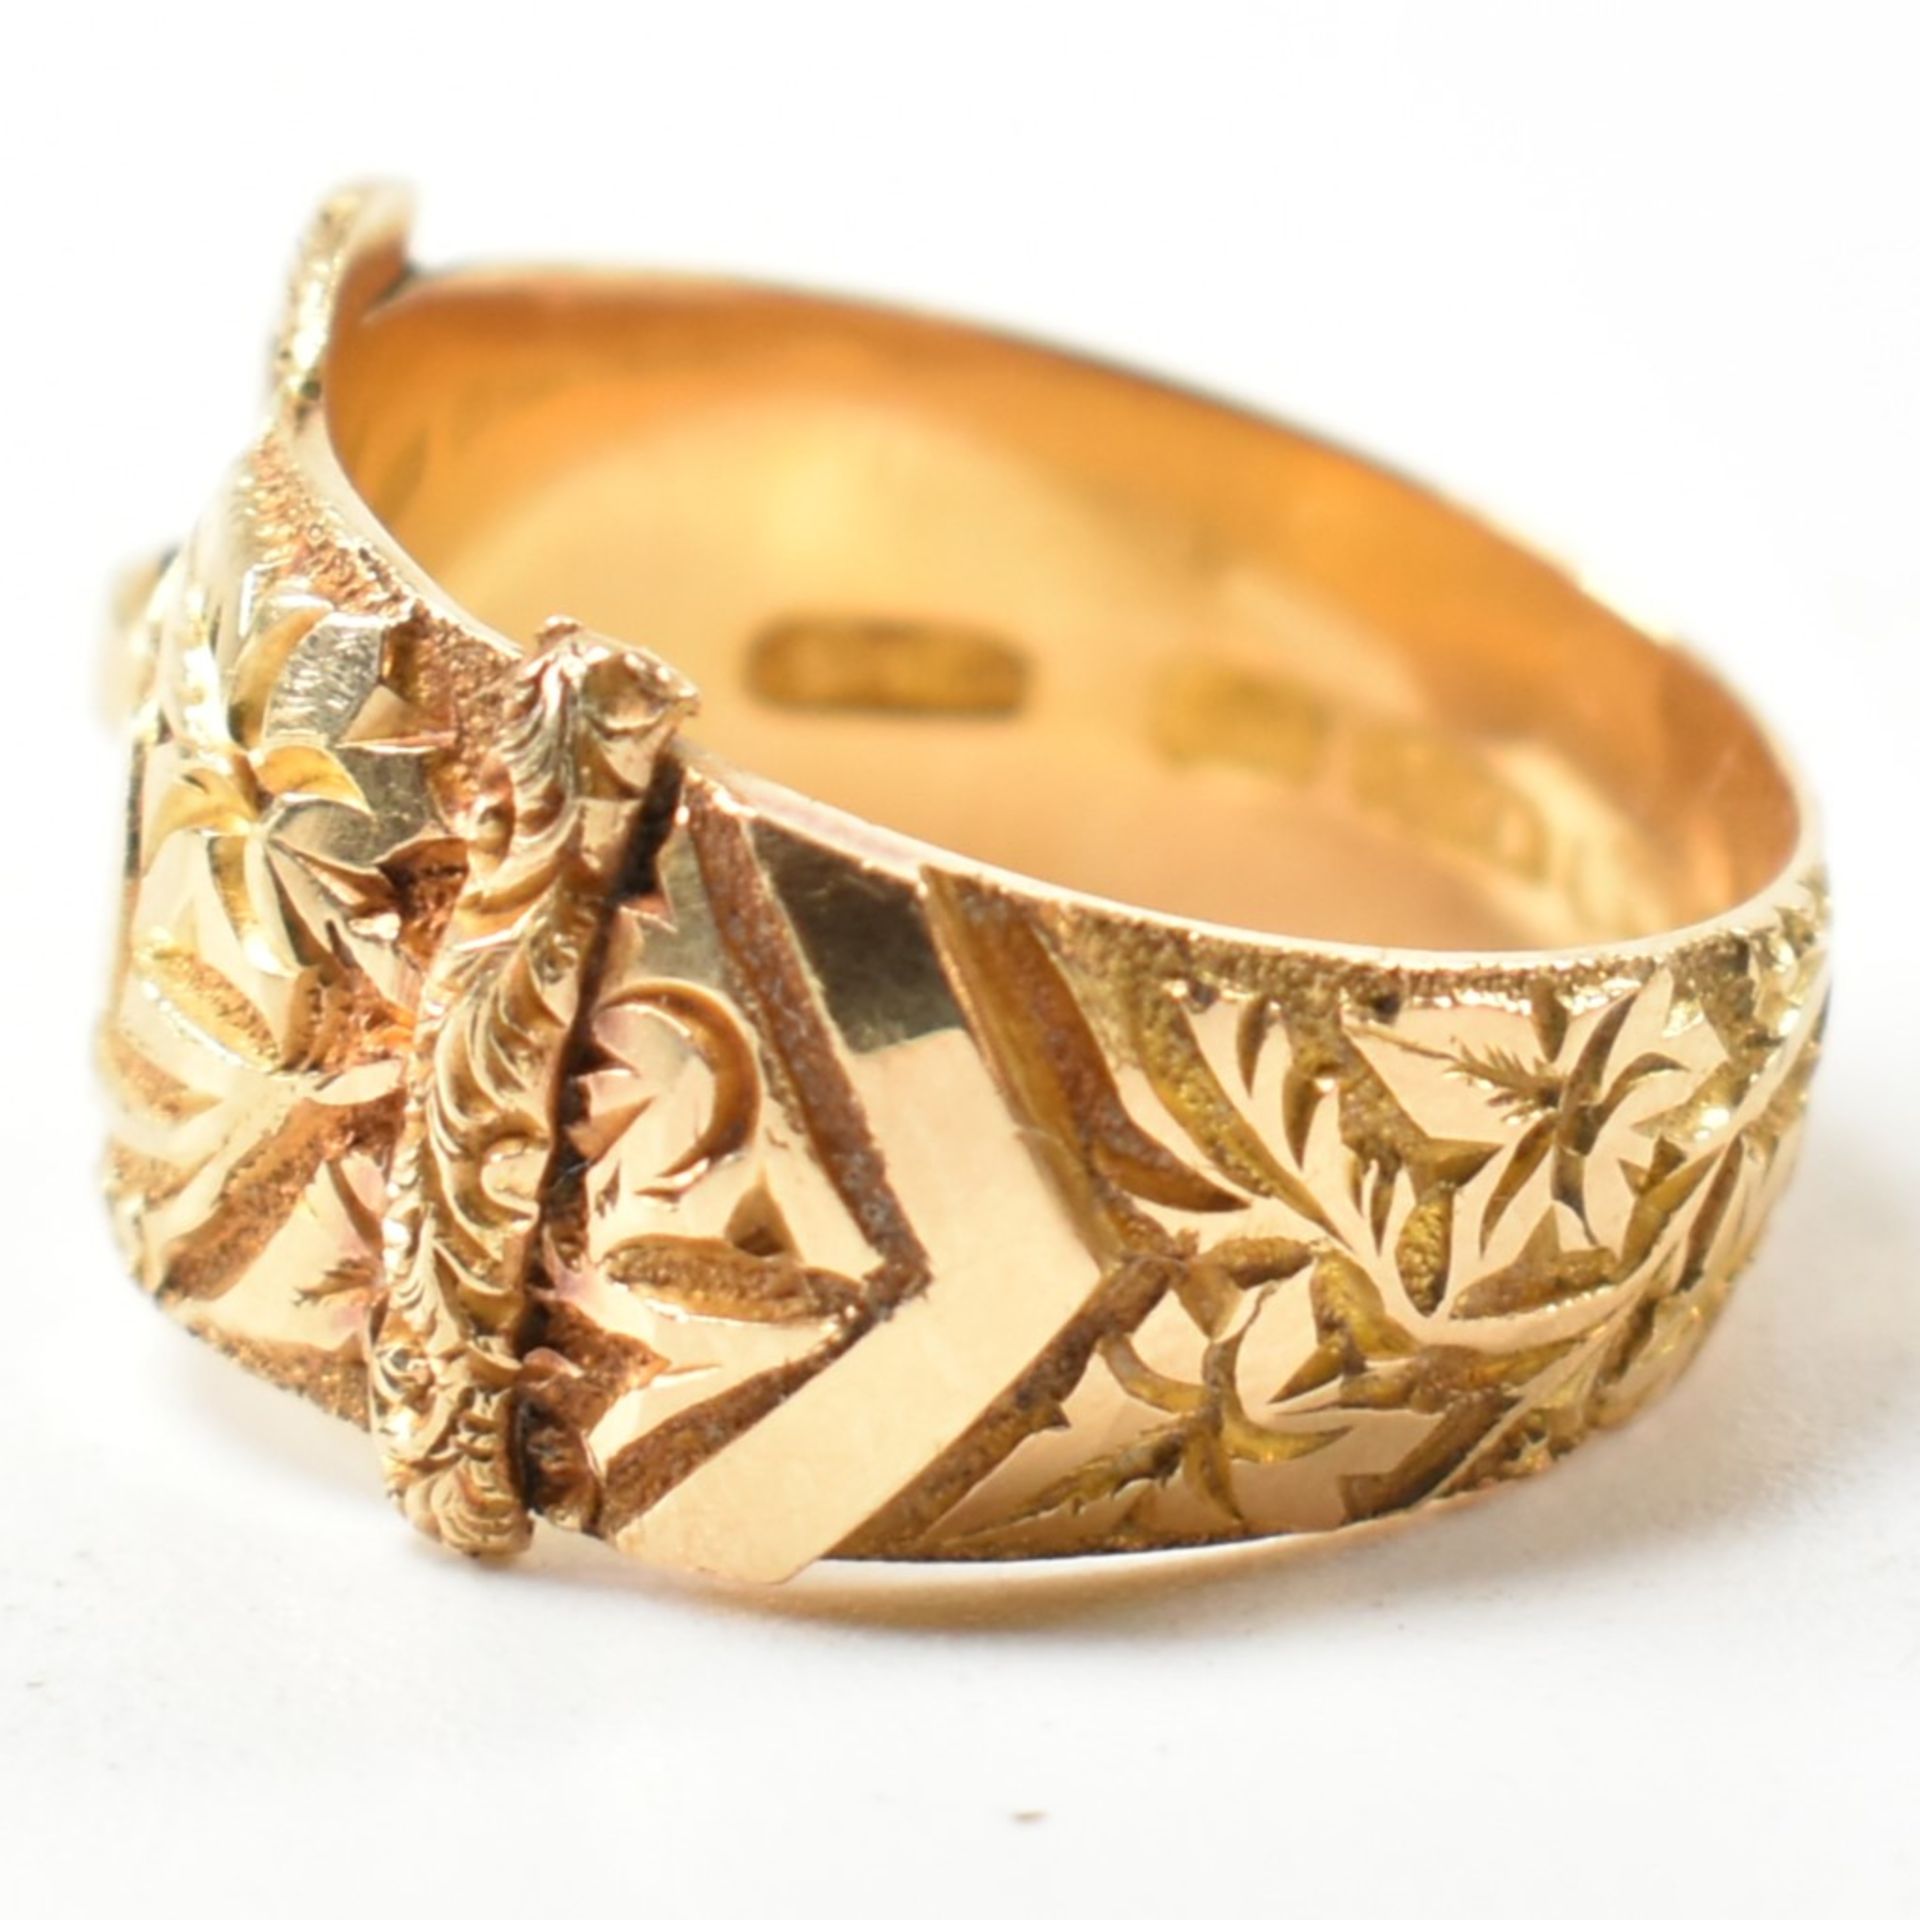 EDWARDIAN HALLMARKED 18CT GOLD BUCKLE RING - Image 6 of 9